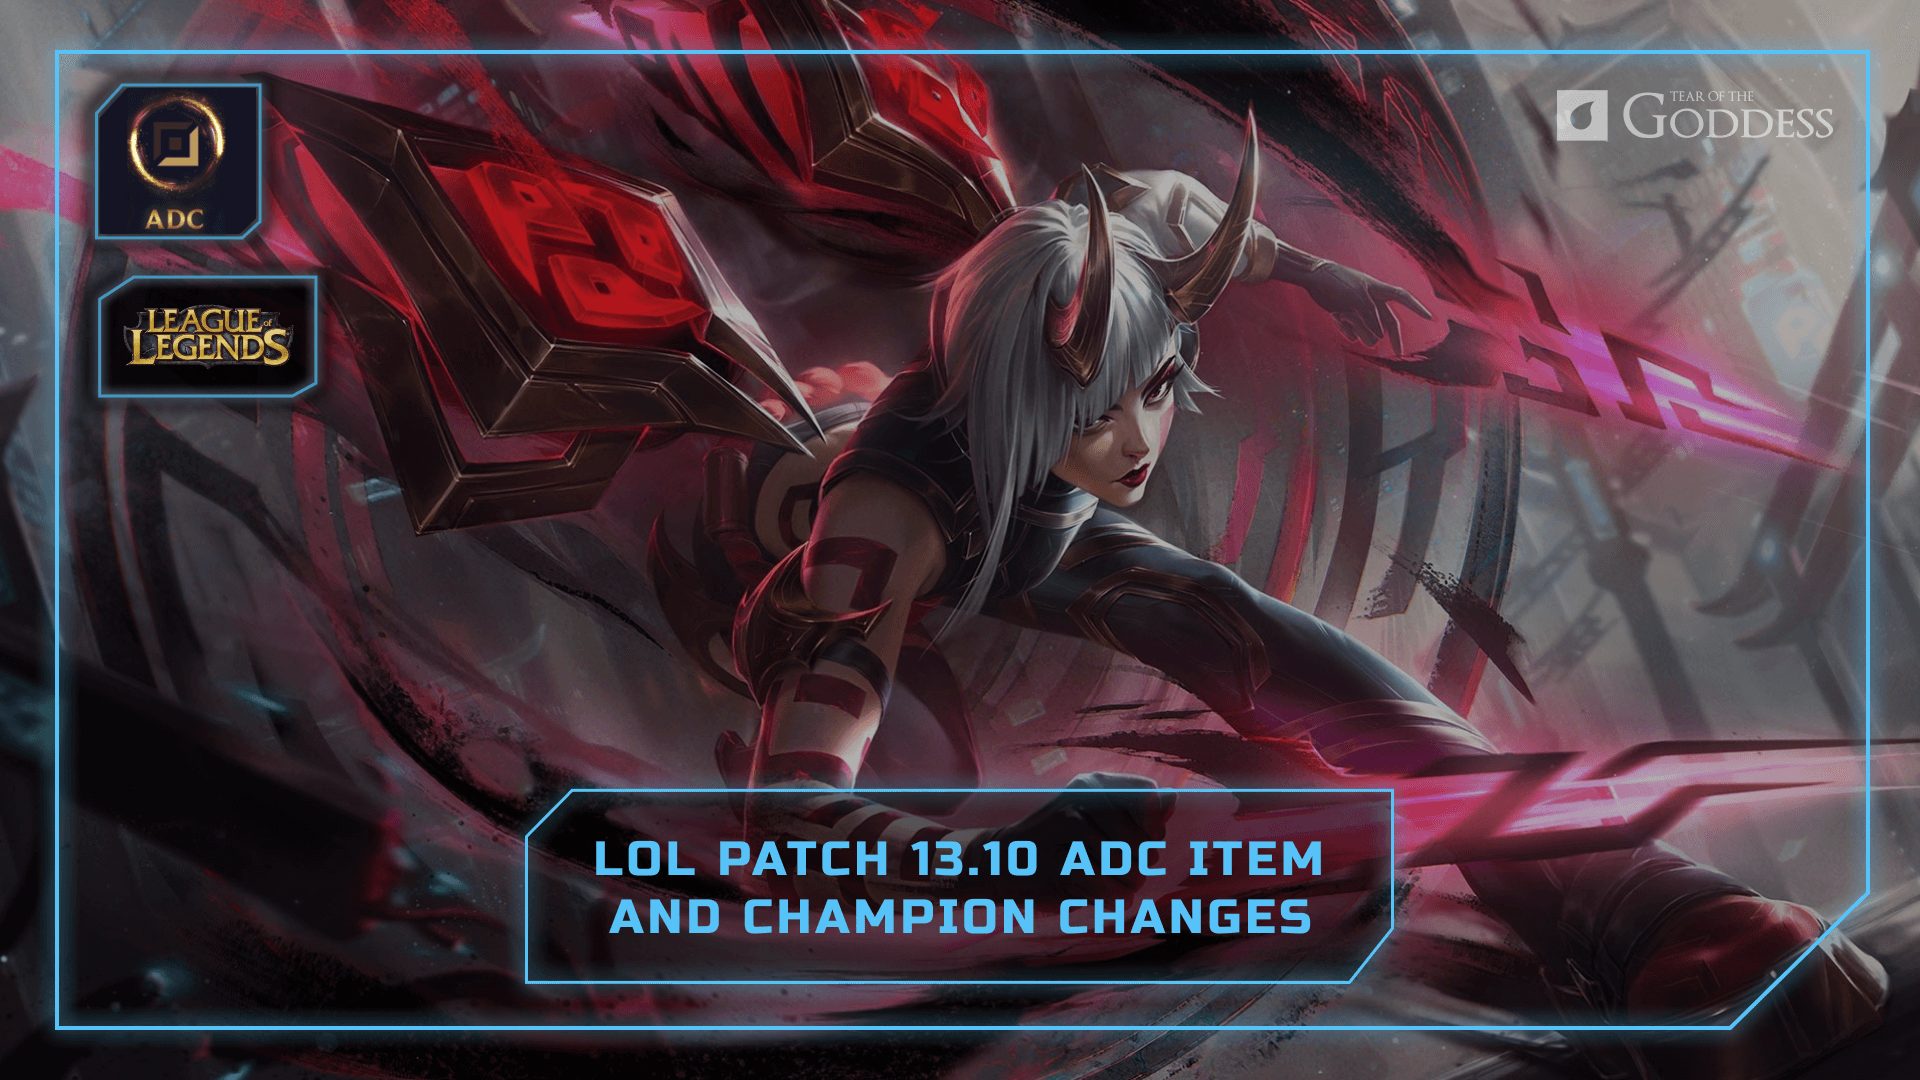 Patch 13.10 notes